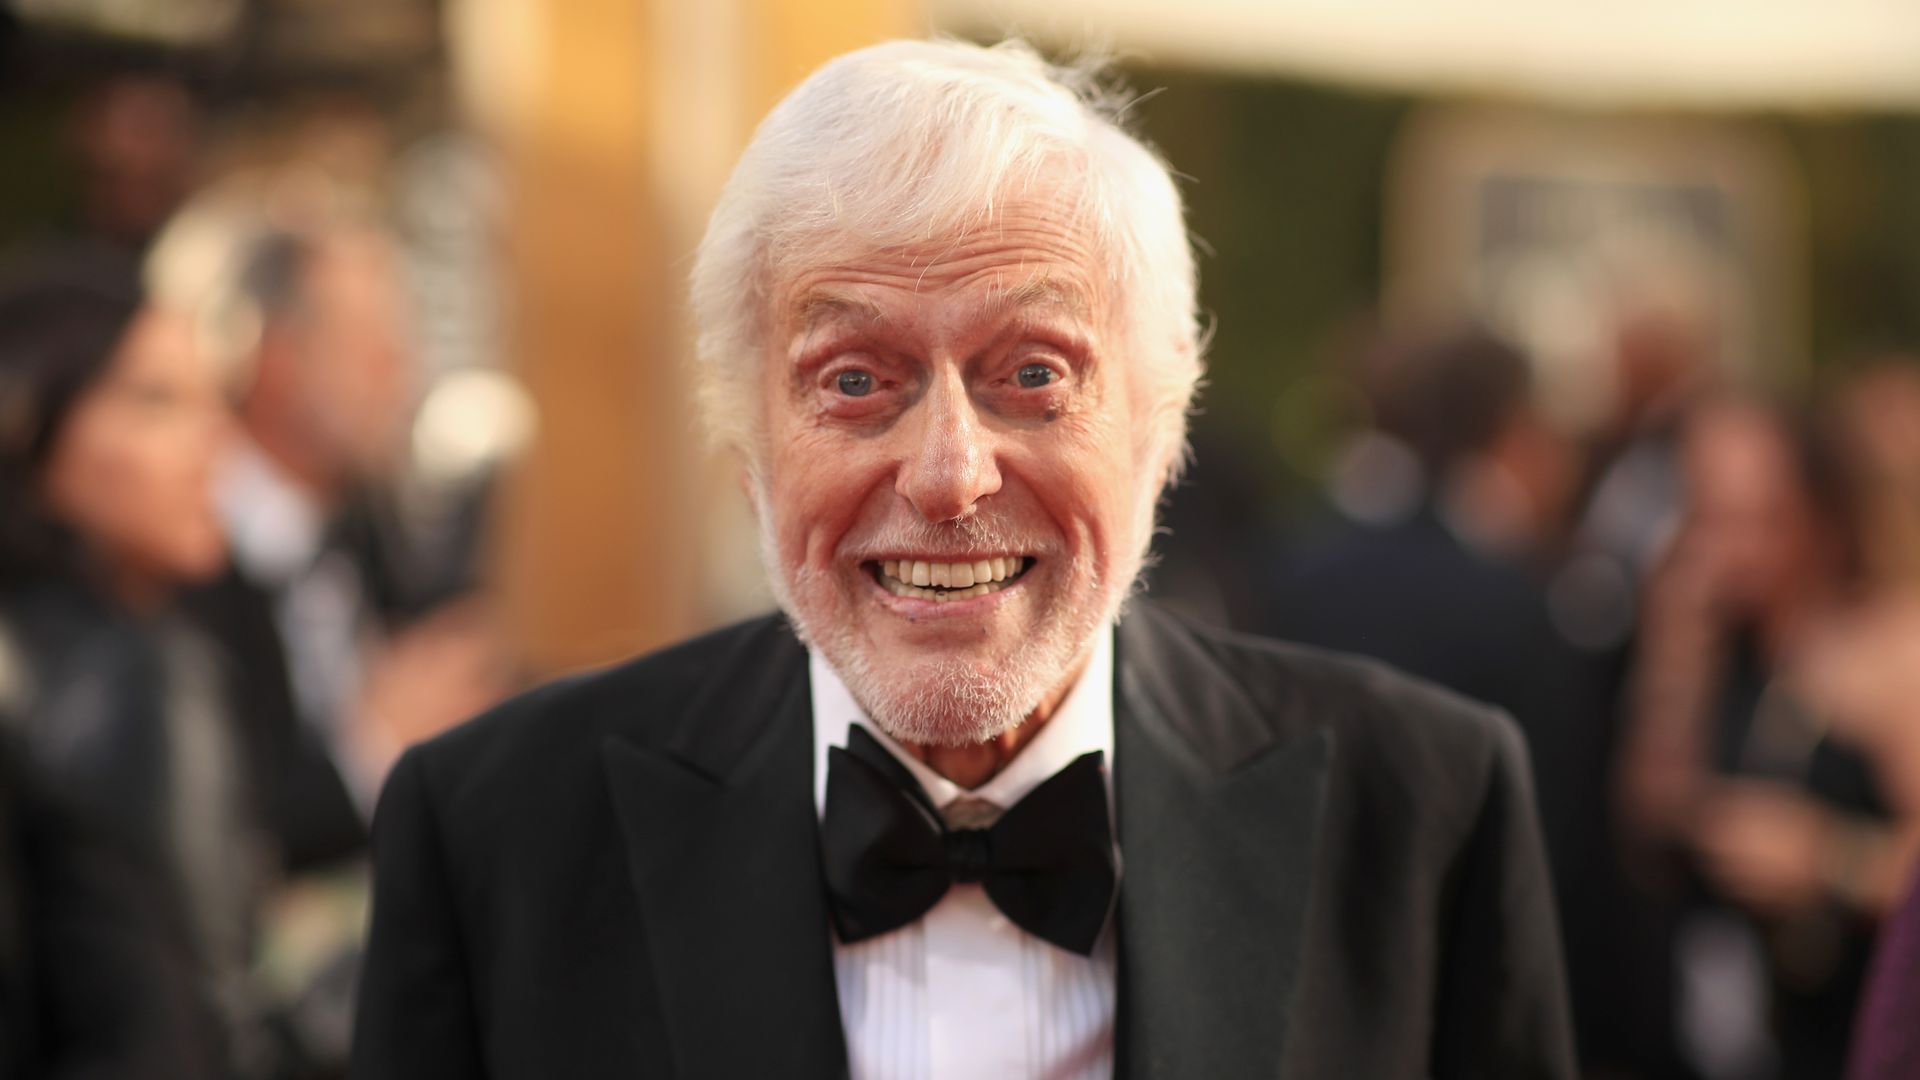 Dick Van Dyke arrives to the 76th Annual Golden Globe Awards held at the Beverly Hilton Hotel on January 6, 2019